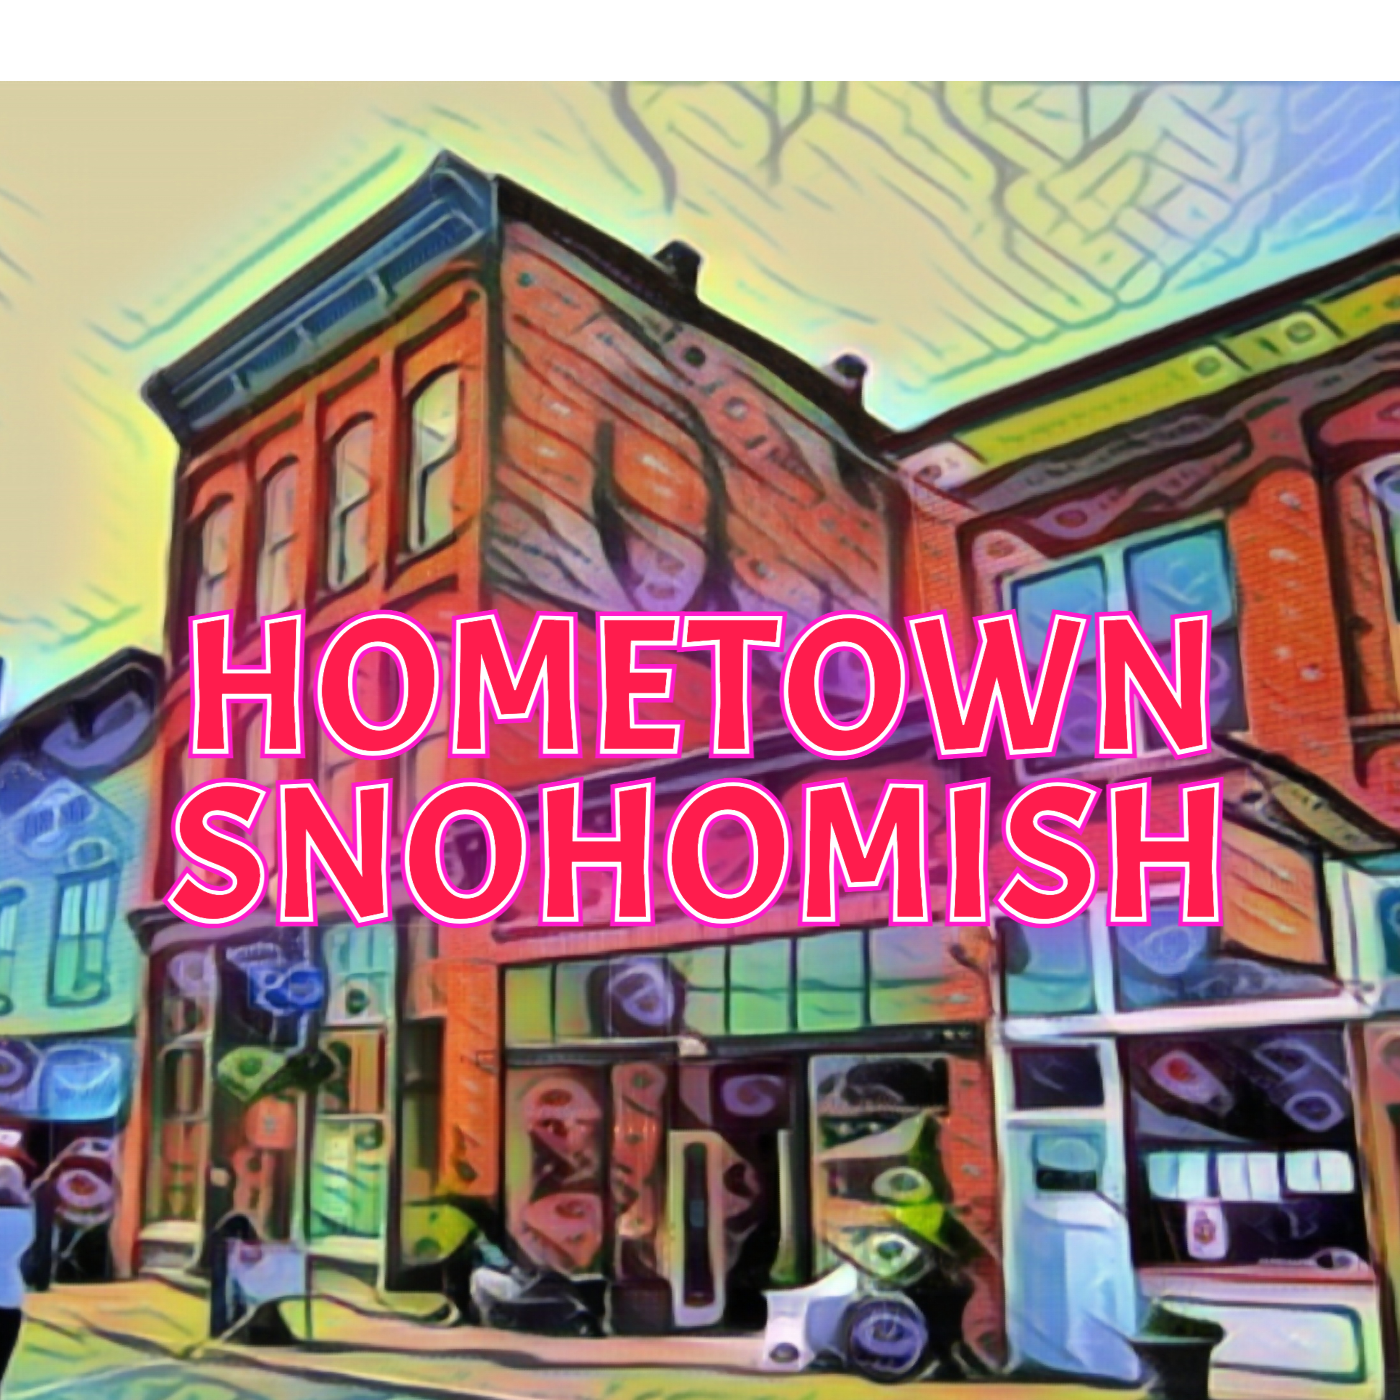 Home town Snohomish